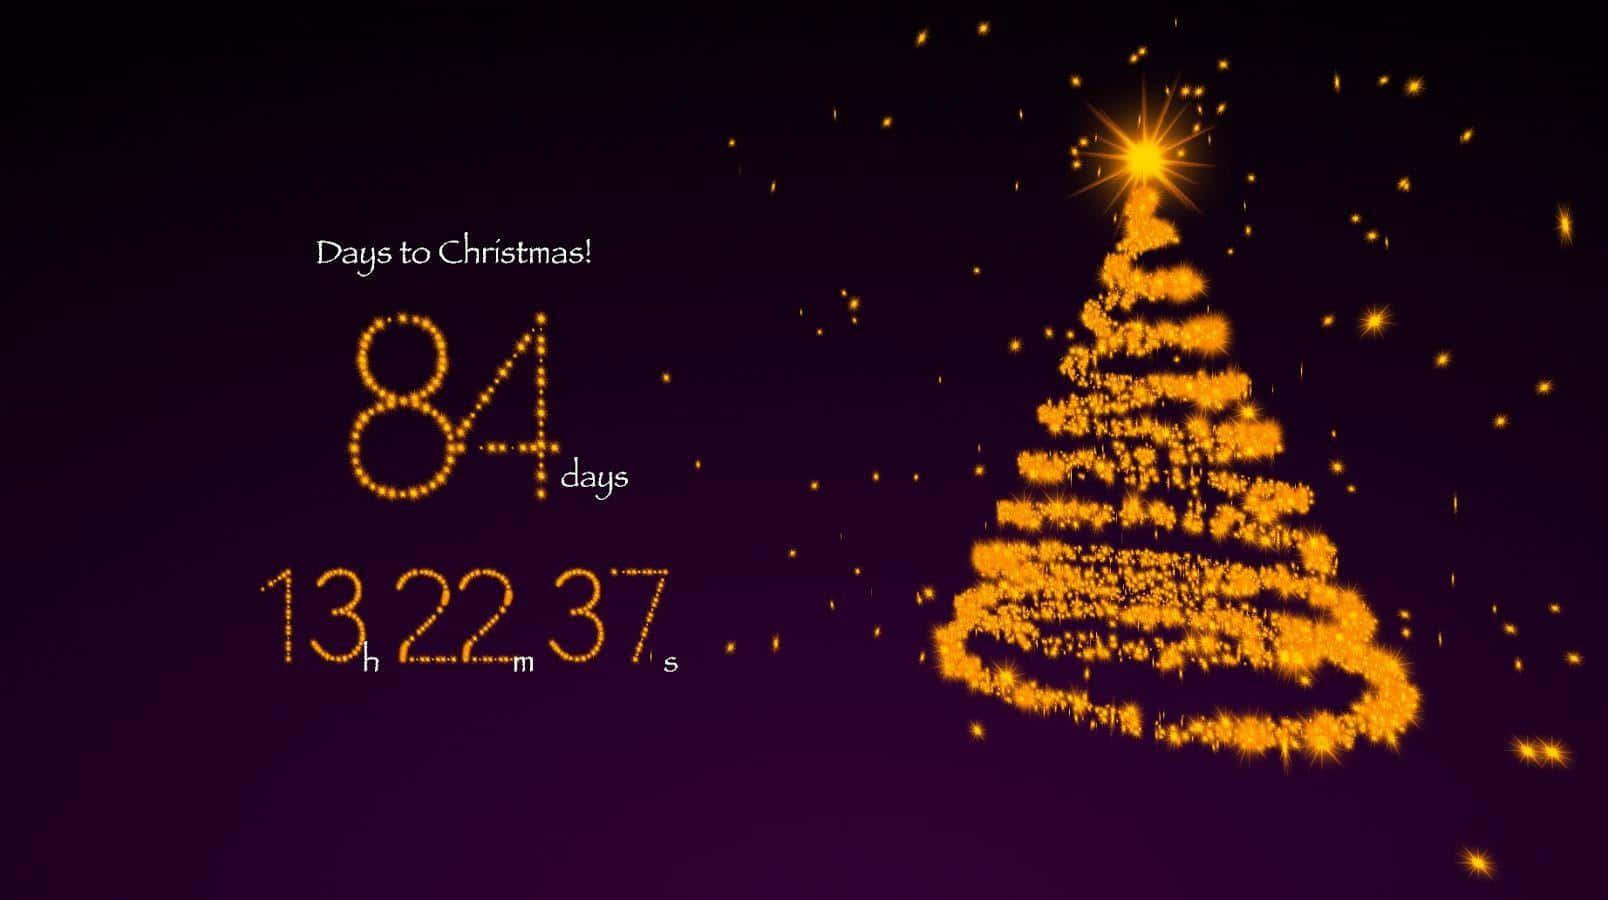 Countdown to the Most Wonderful Time of the Year Wallpaper